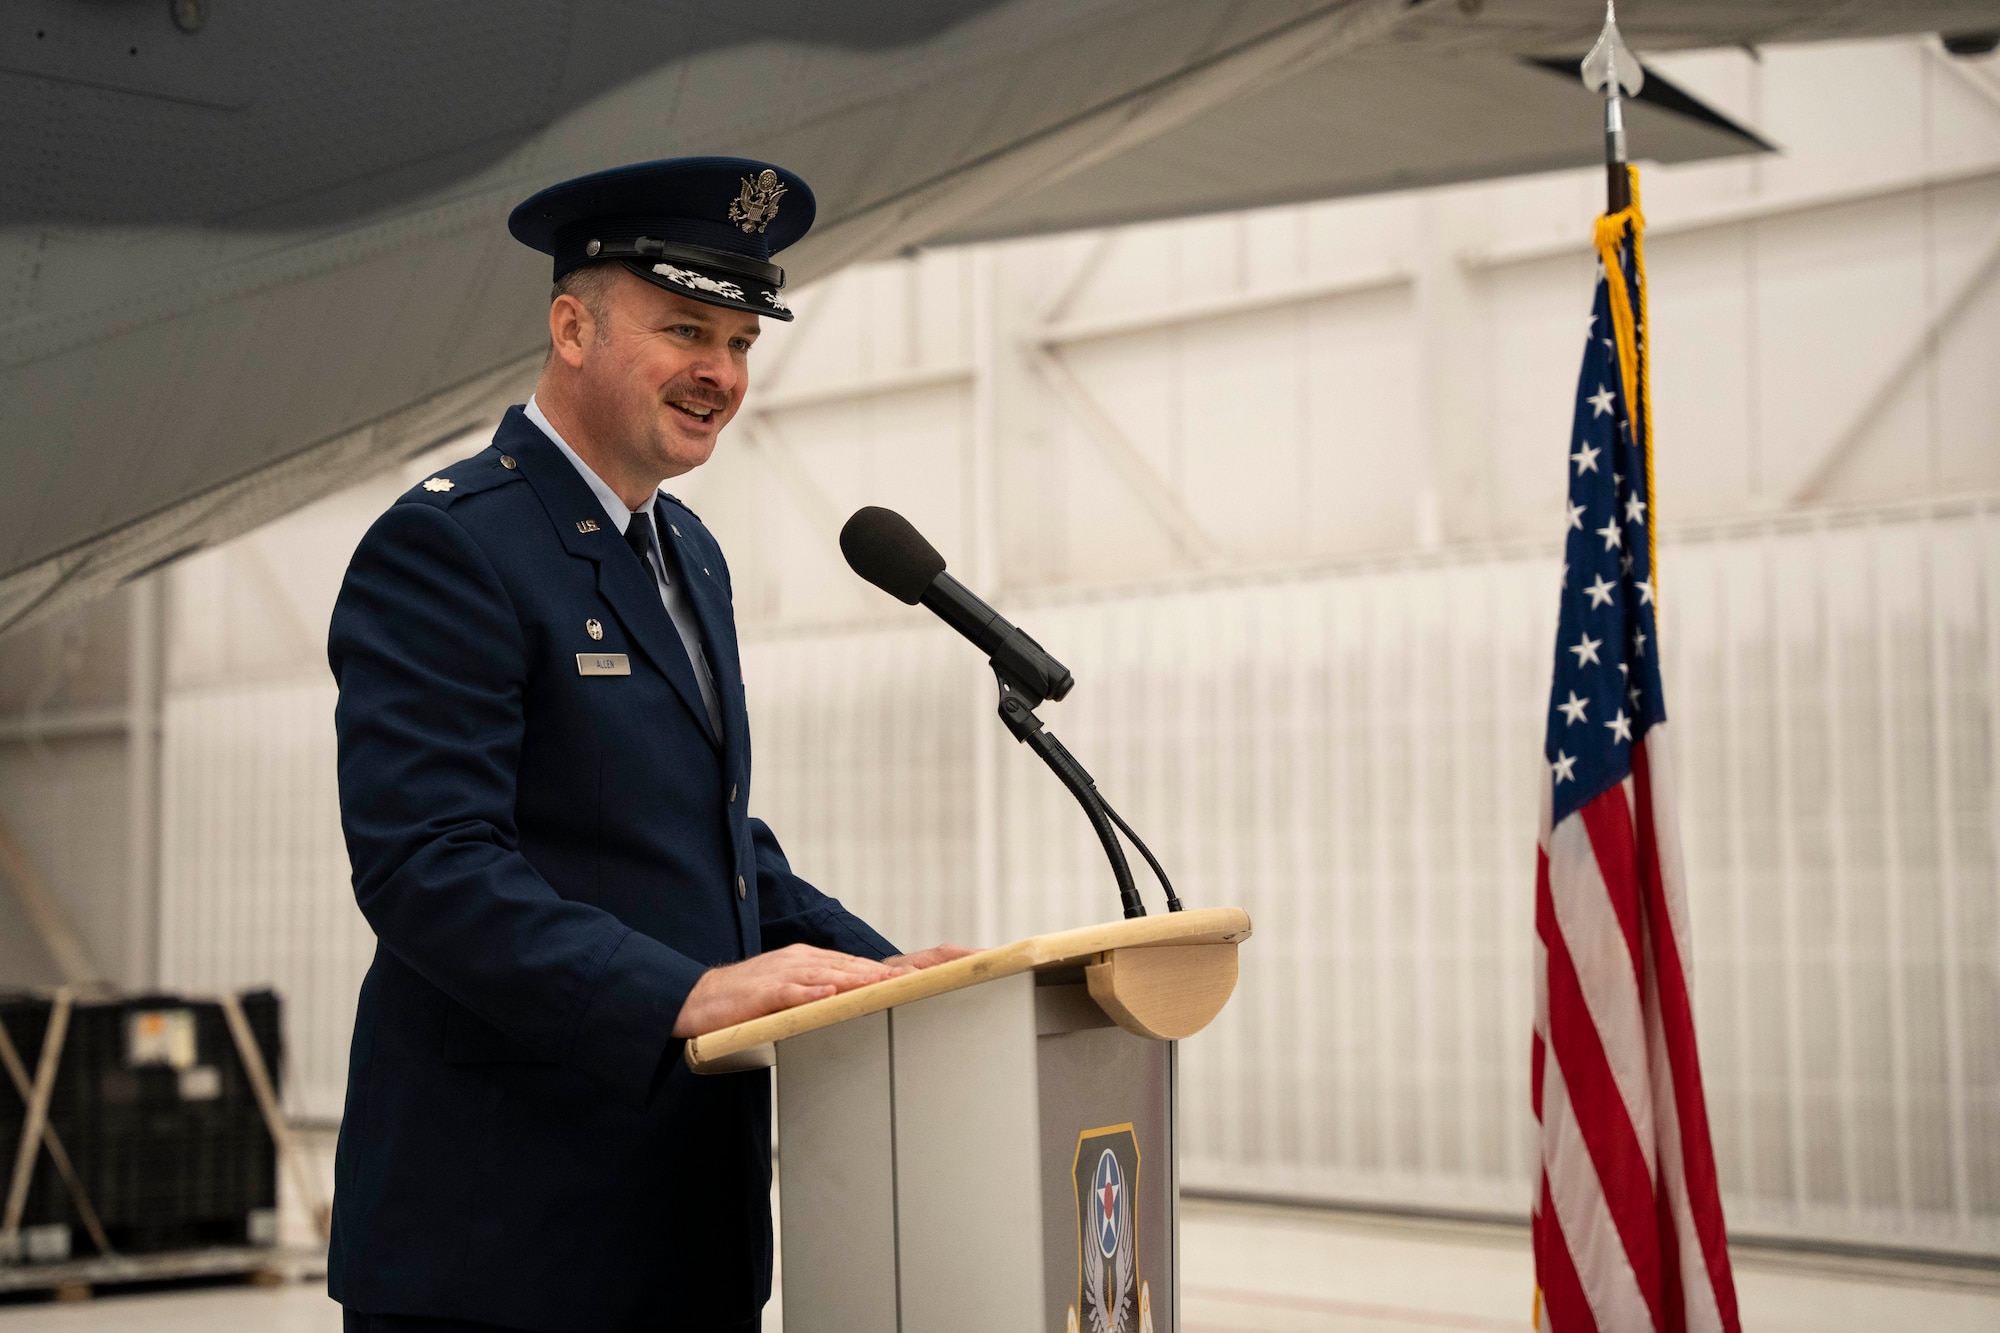 U.S. Air Force Lt. Col. Sean Allen, 16th Special Operations Aircraft Maintenance Squadron commander, provides closing remarks at the 27th Special Operations Aircraft Maintenance Squadron redesignation ceremony at Cannon Air Force Base, N.M., March 15, 2024. The 16th SOAMXS will organize, train and equip maintenance personnel to generate AC-130J Ghostrider gunship sorties supporting close air support, precision strike and air interdiction operations globally. (U.S. Air Force photo by Airman 1st Class Tori Shearn)